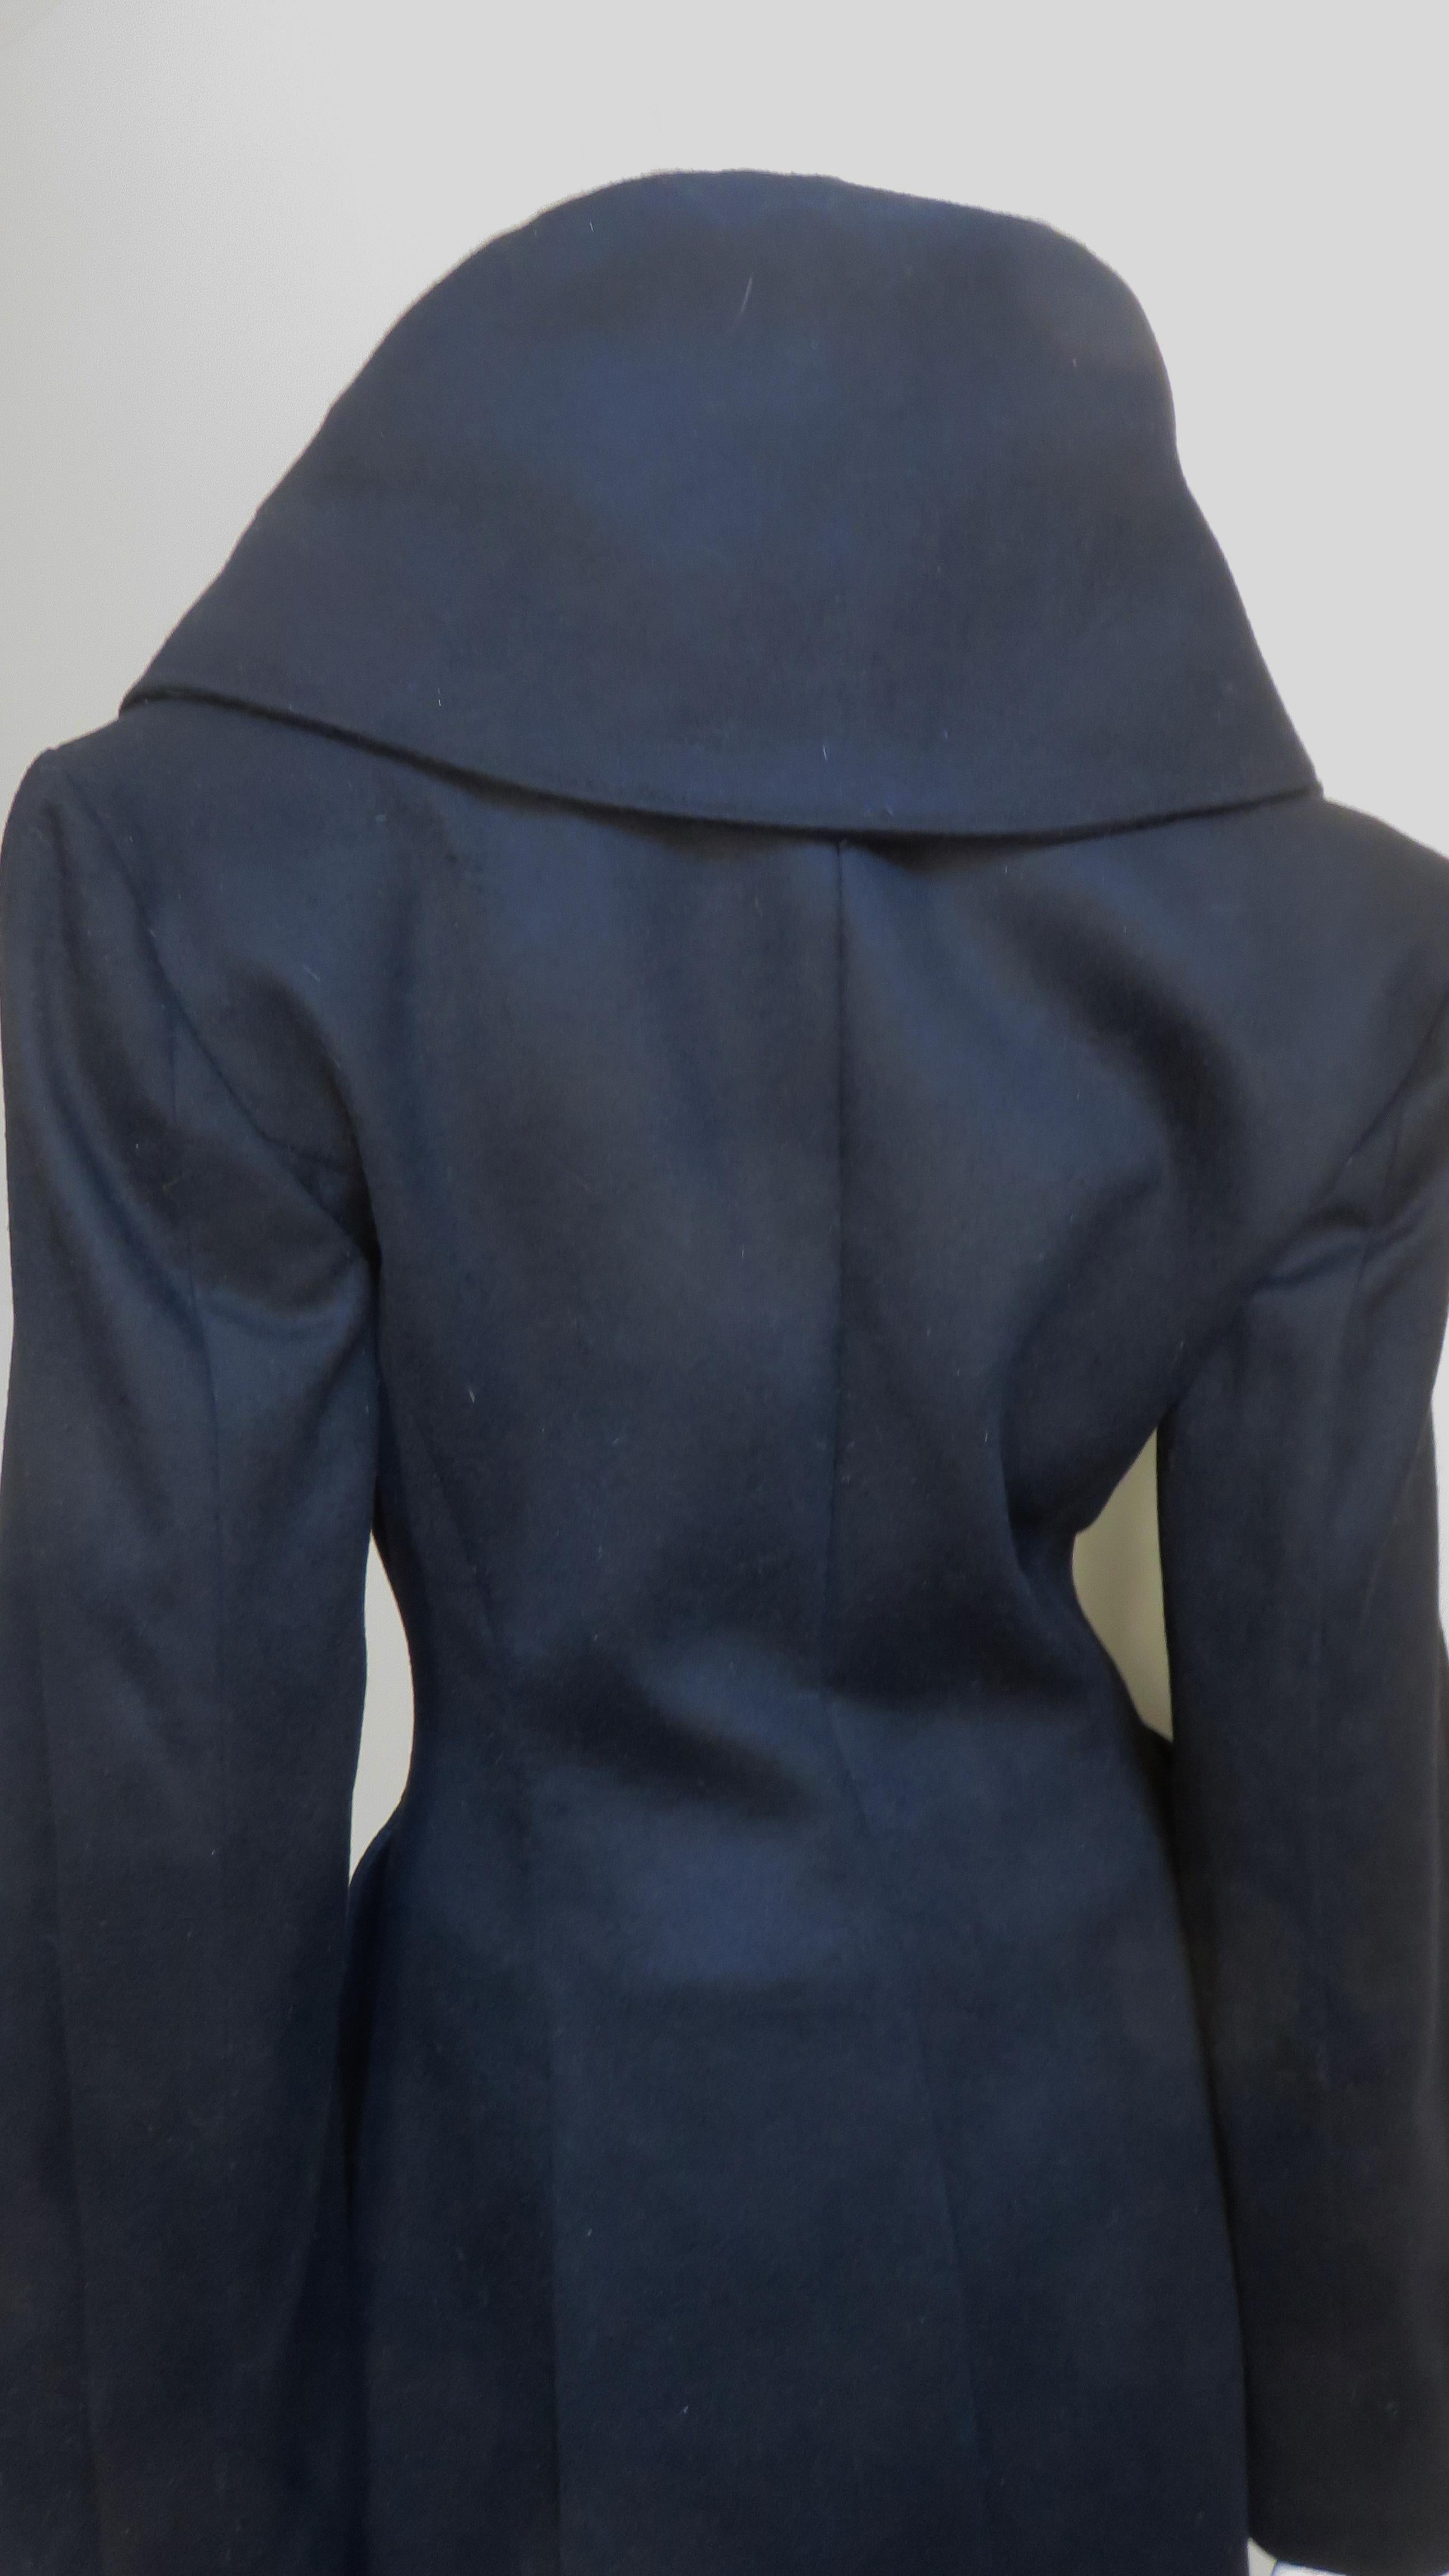 Alexander McQueen New Cashmere Popped Lapel Collar Jacket and Skirt A/W 1999 For Sale 2